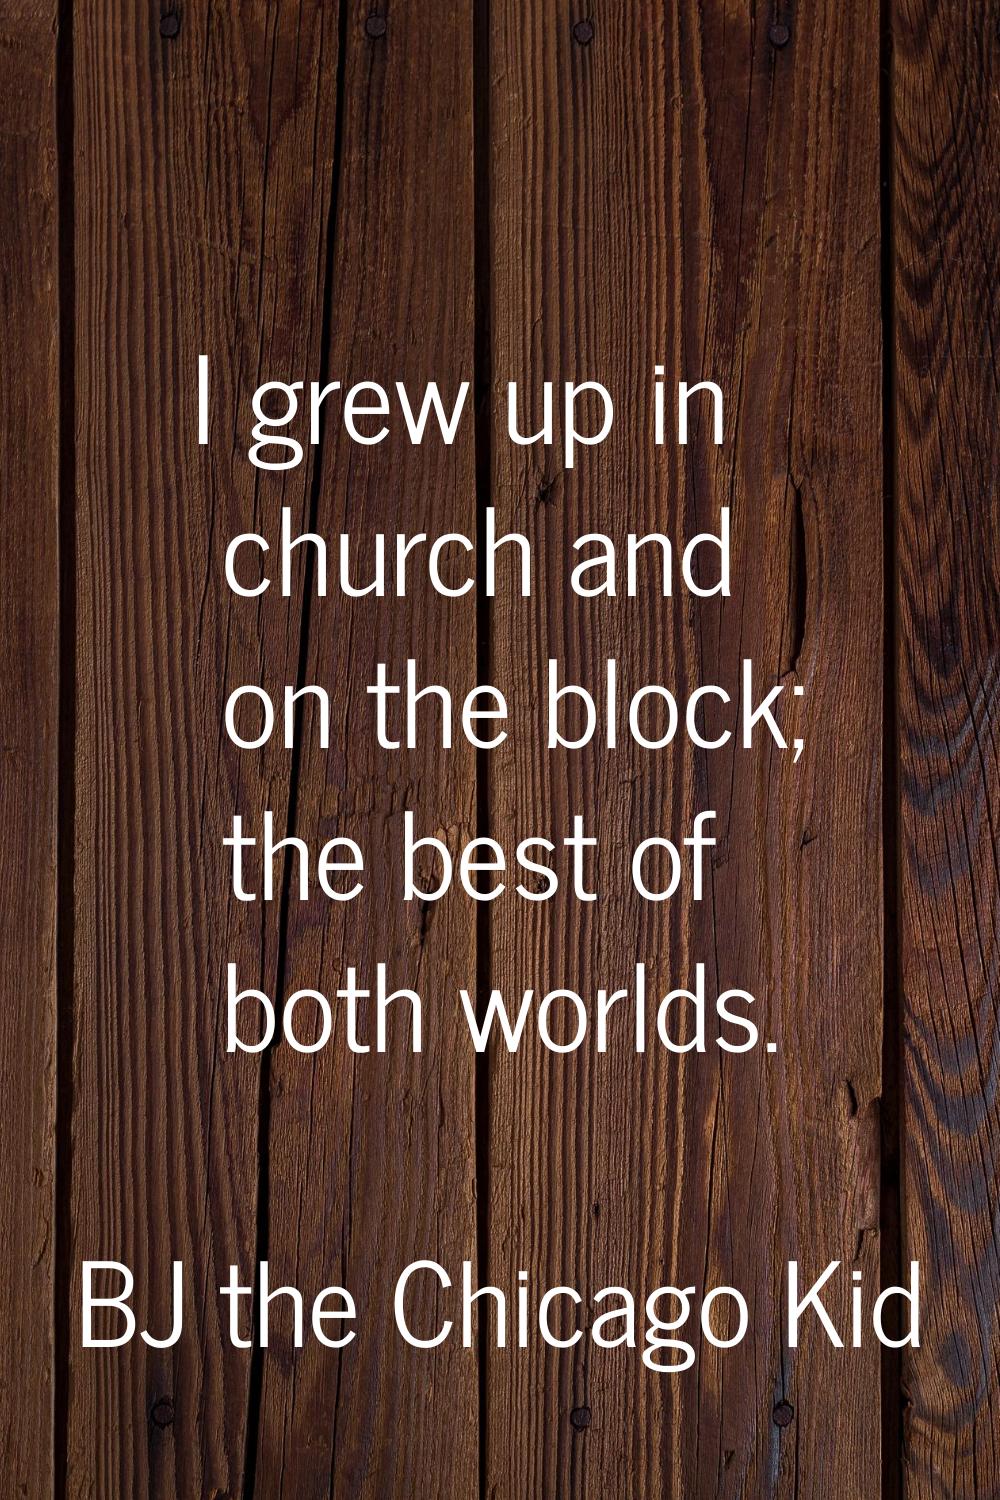 I grew up in church and on the block; the best of both worlds.